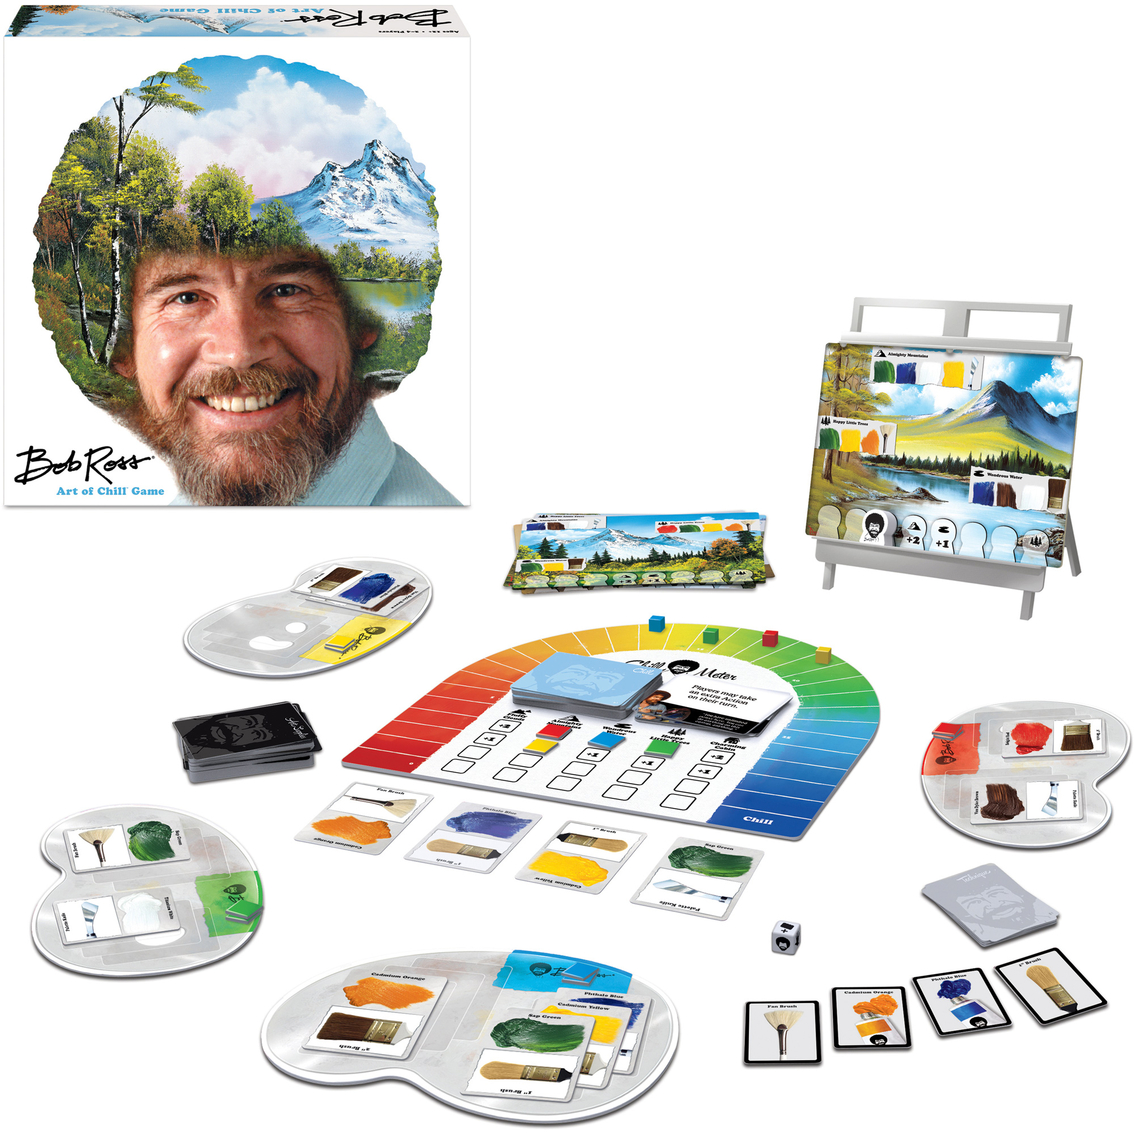 License 2 Play Bob Ross Art of Chill Game - Image 4 of 4